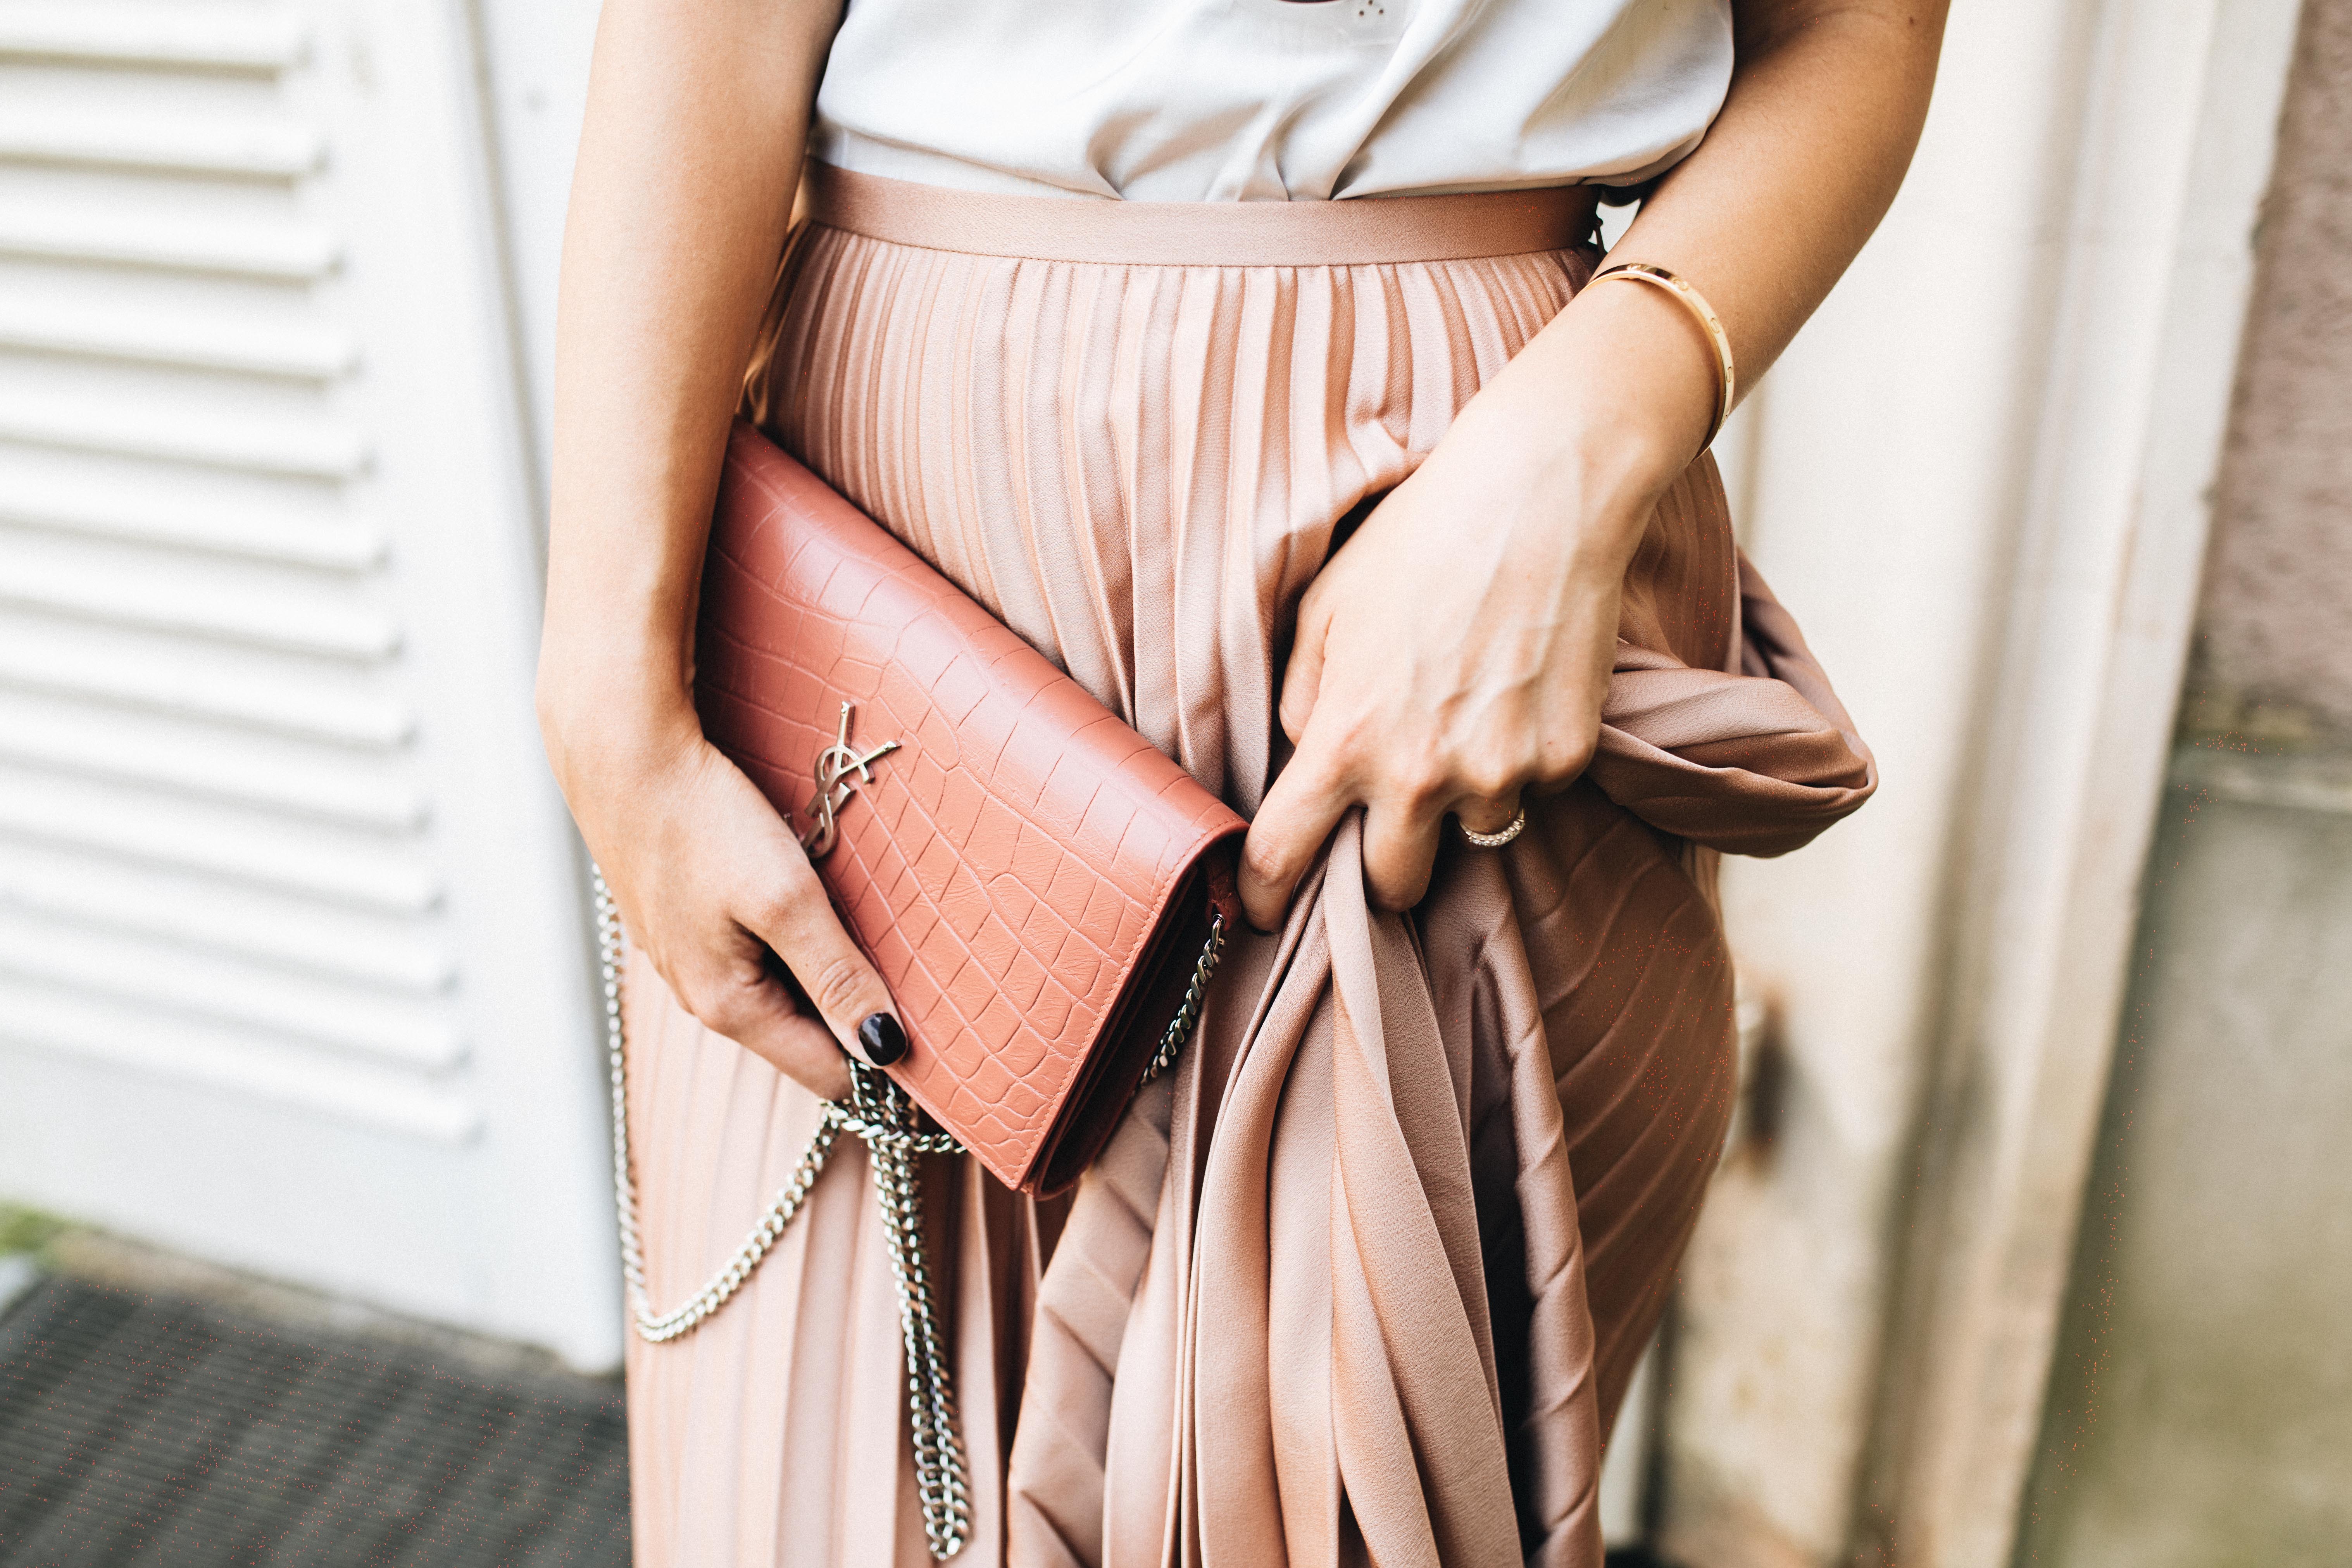 OUTFIT: It's a pleated skirt love affair - You rock my life